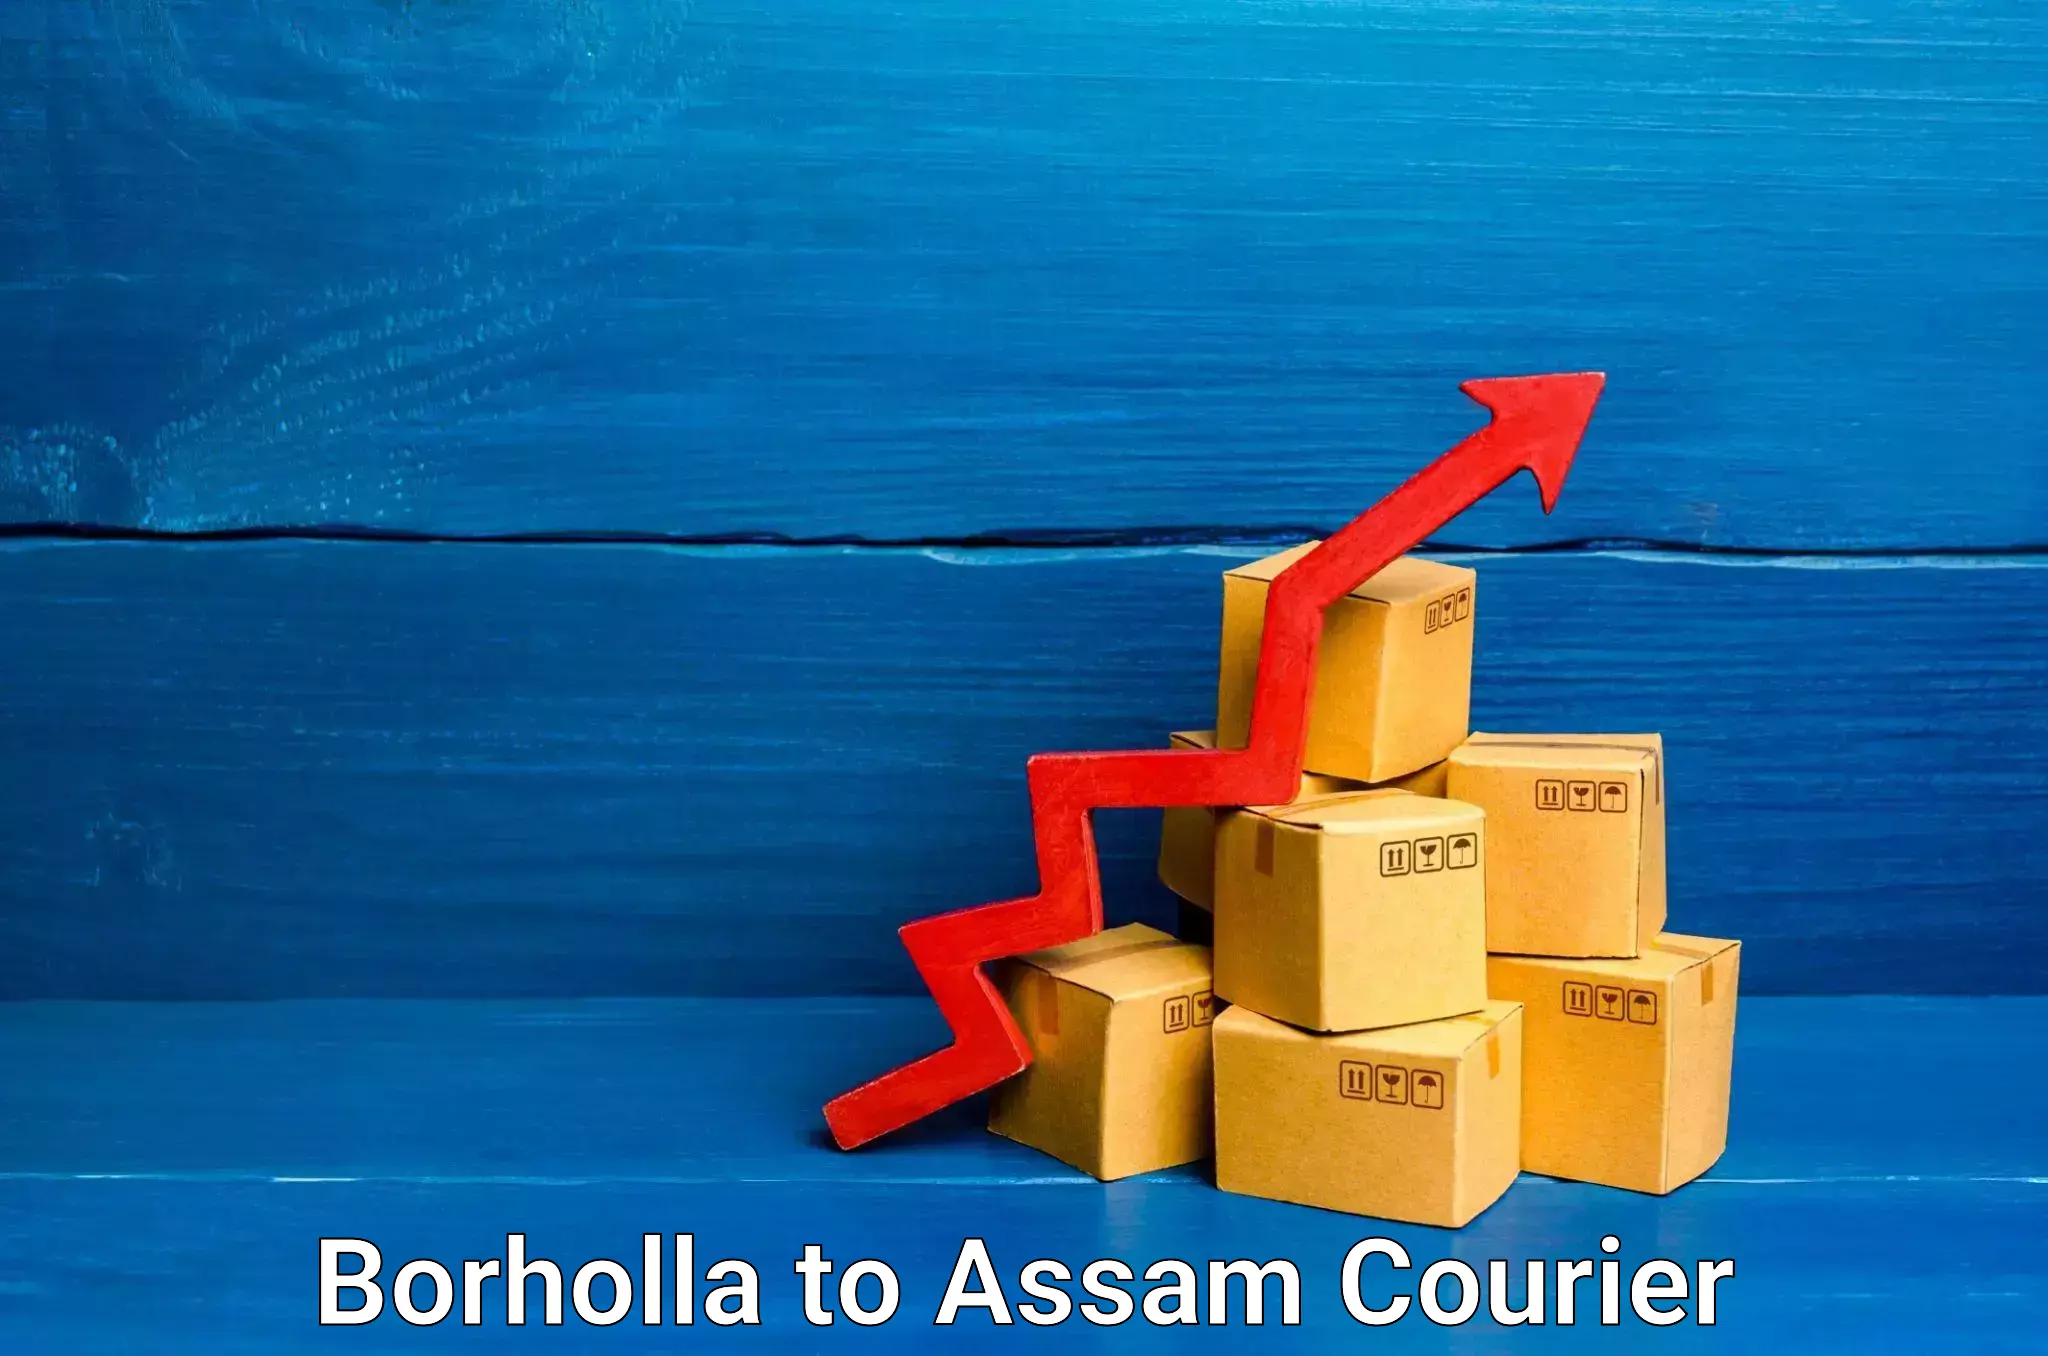 Secure package delivery in Borholla to Guwahati